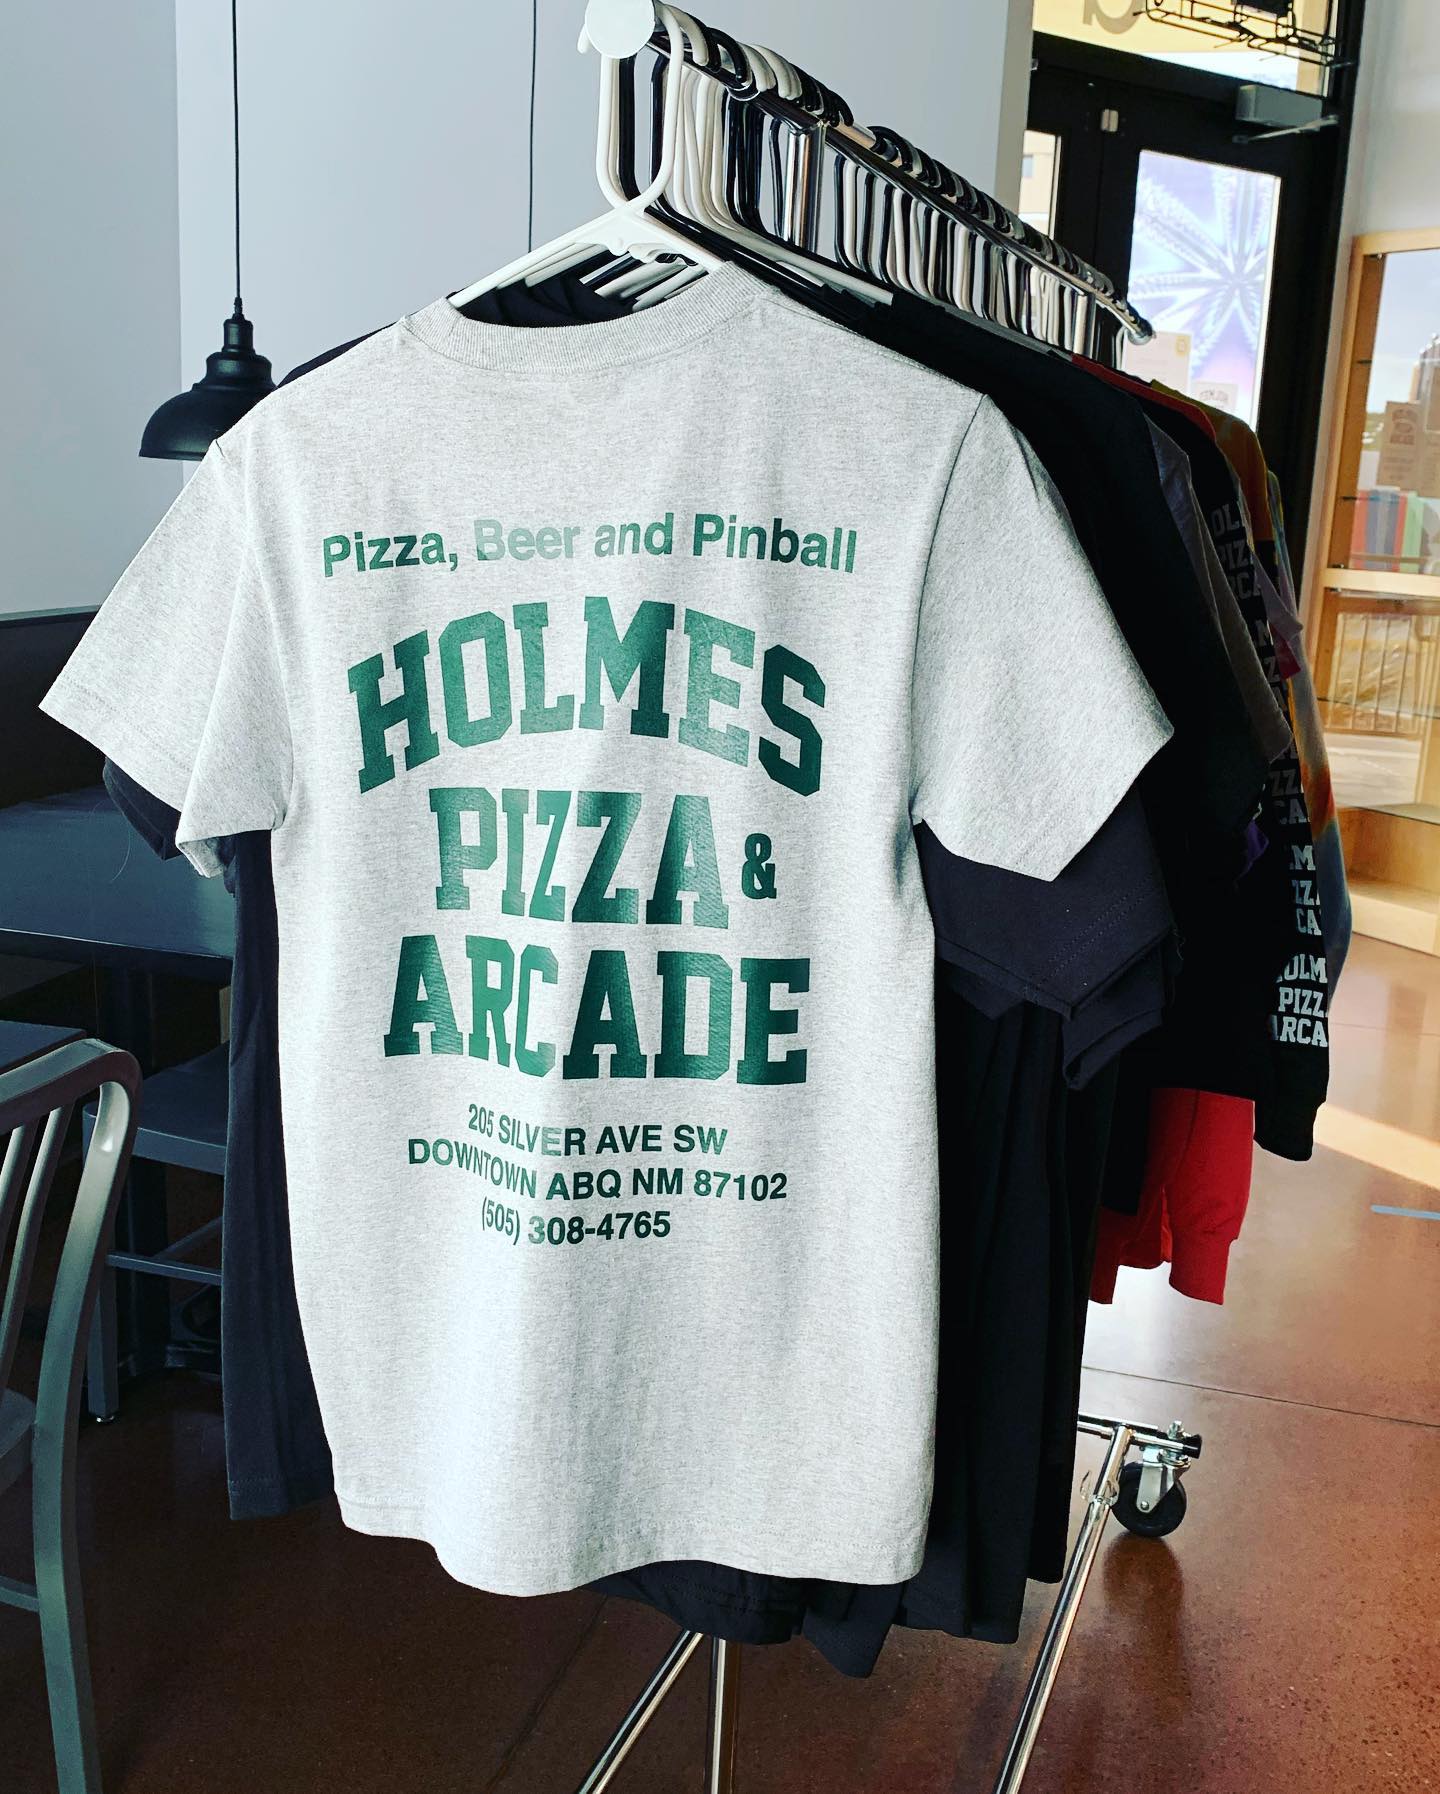 T-shirt on rack saying Pizza, Beer and Pinball, Holmes Pizza and Arcade